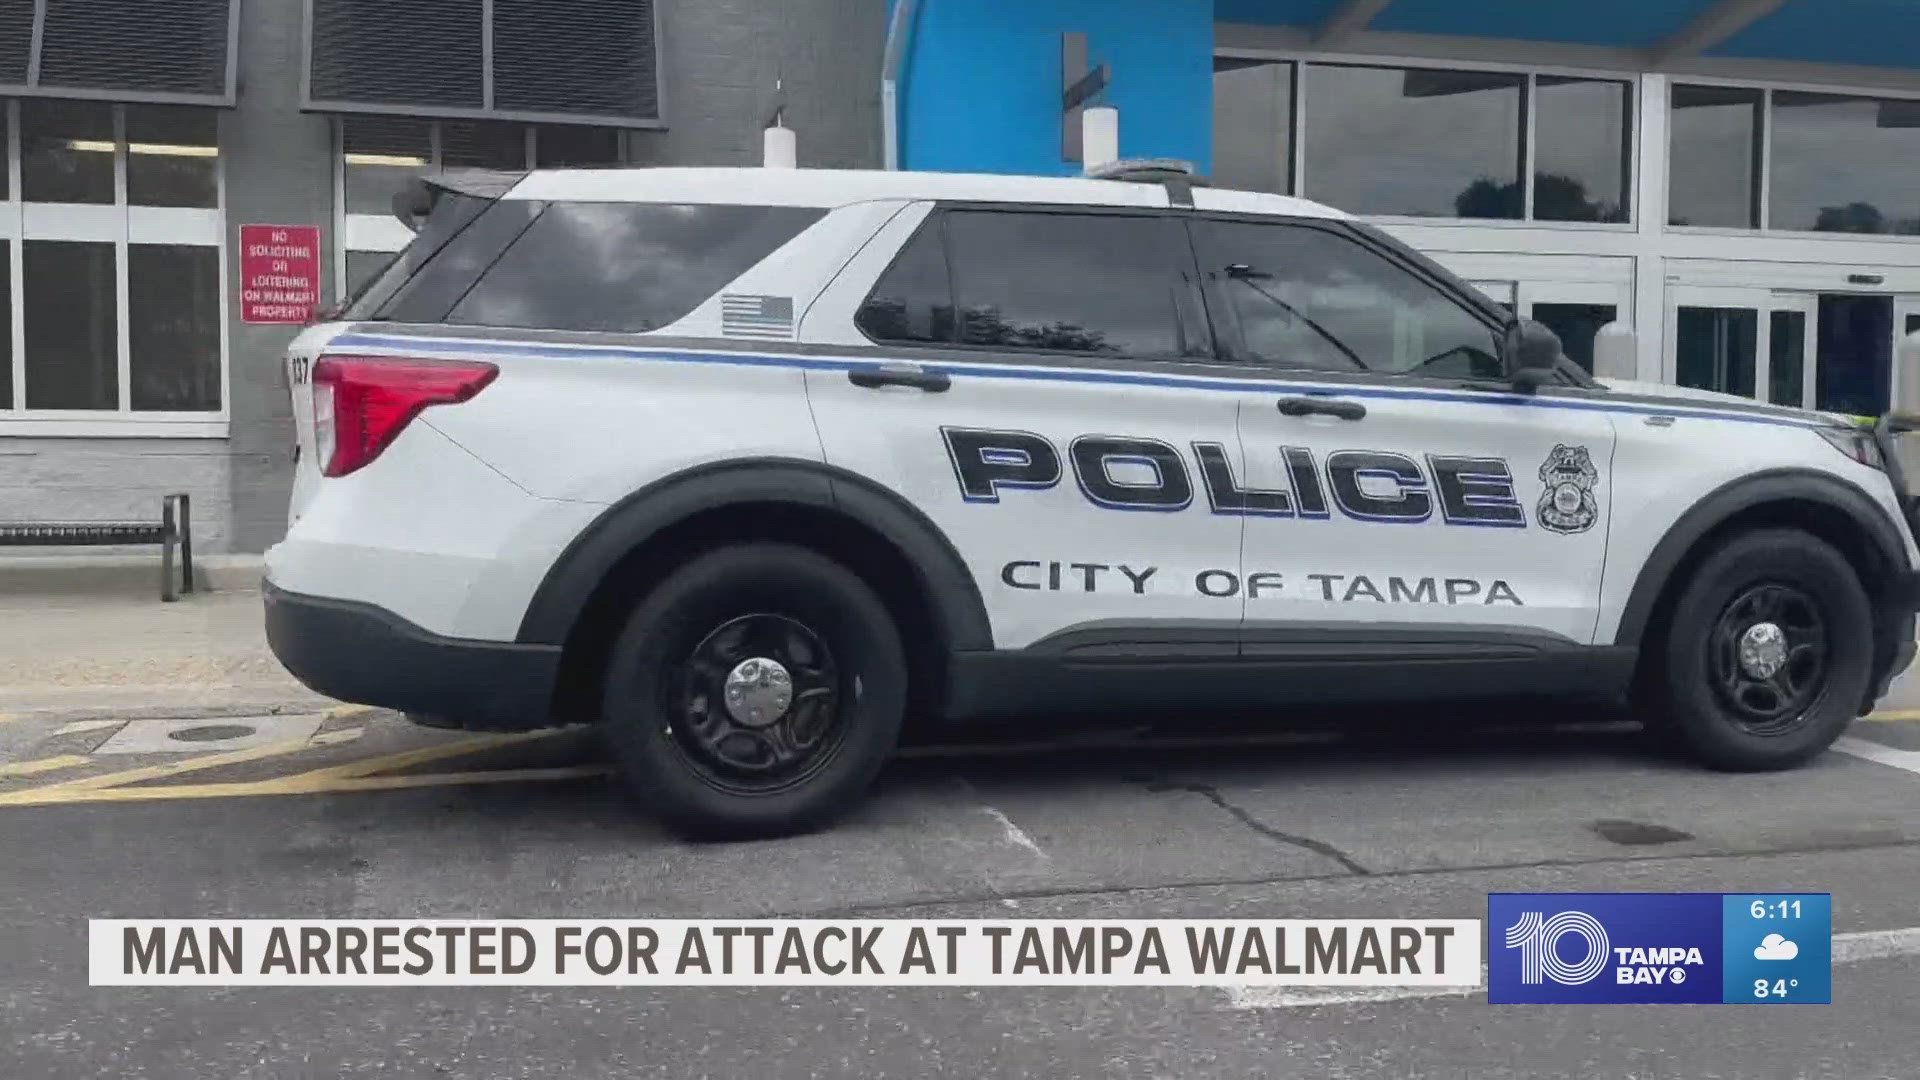 Police say the attack occurred after an argument escalated between a vendor and a group of people. The store will remain closed as the investigation continues.